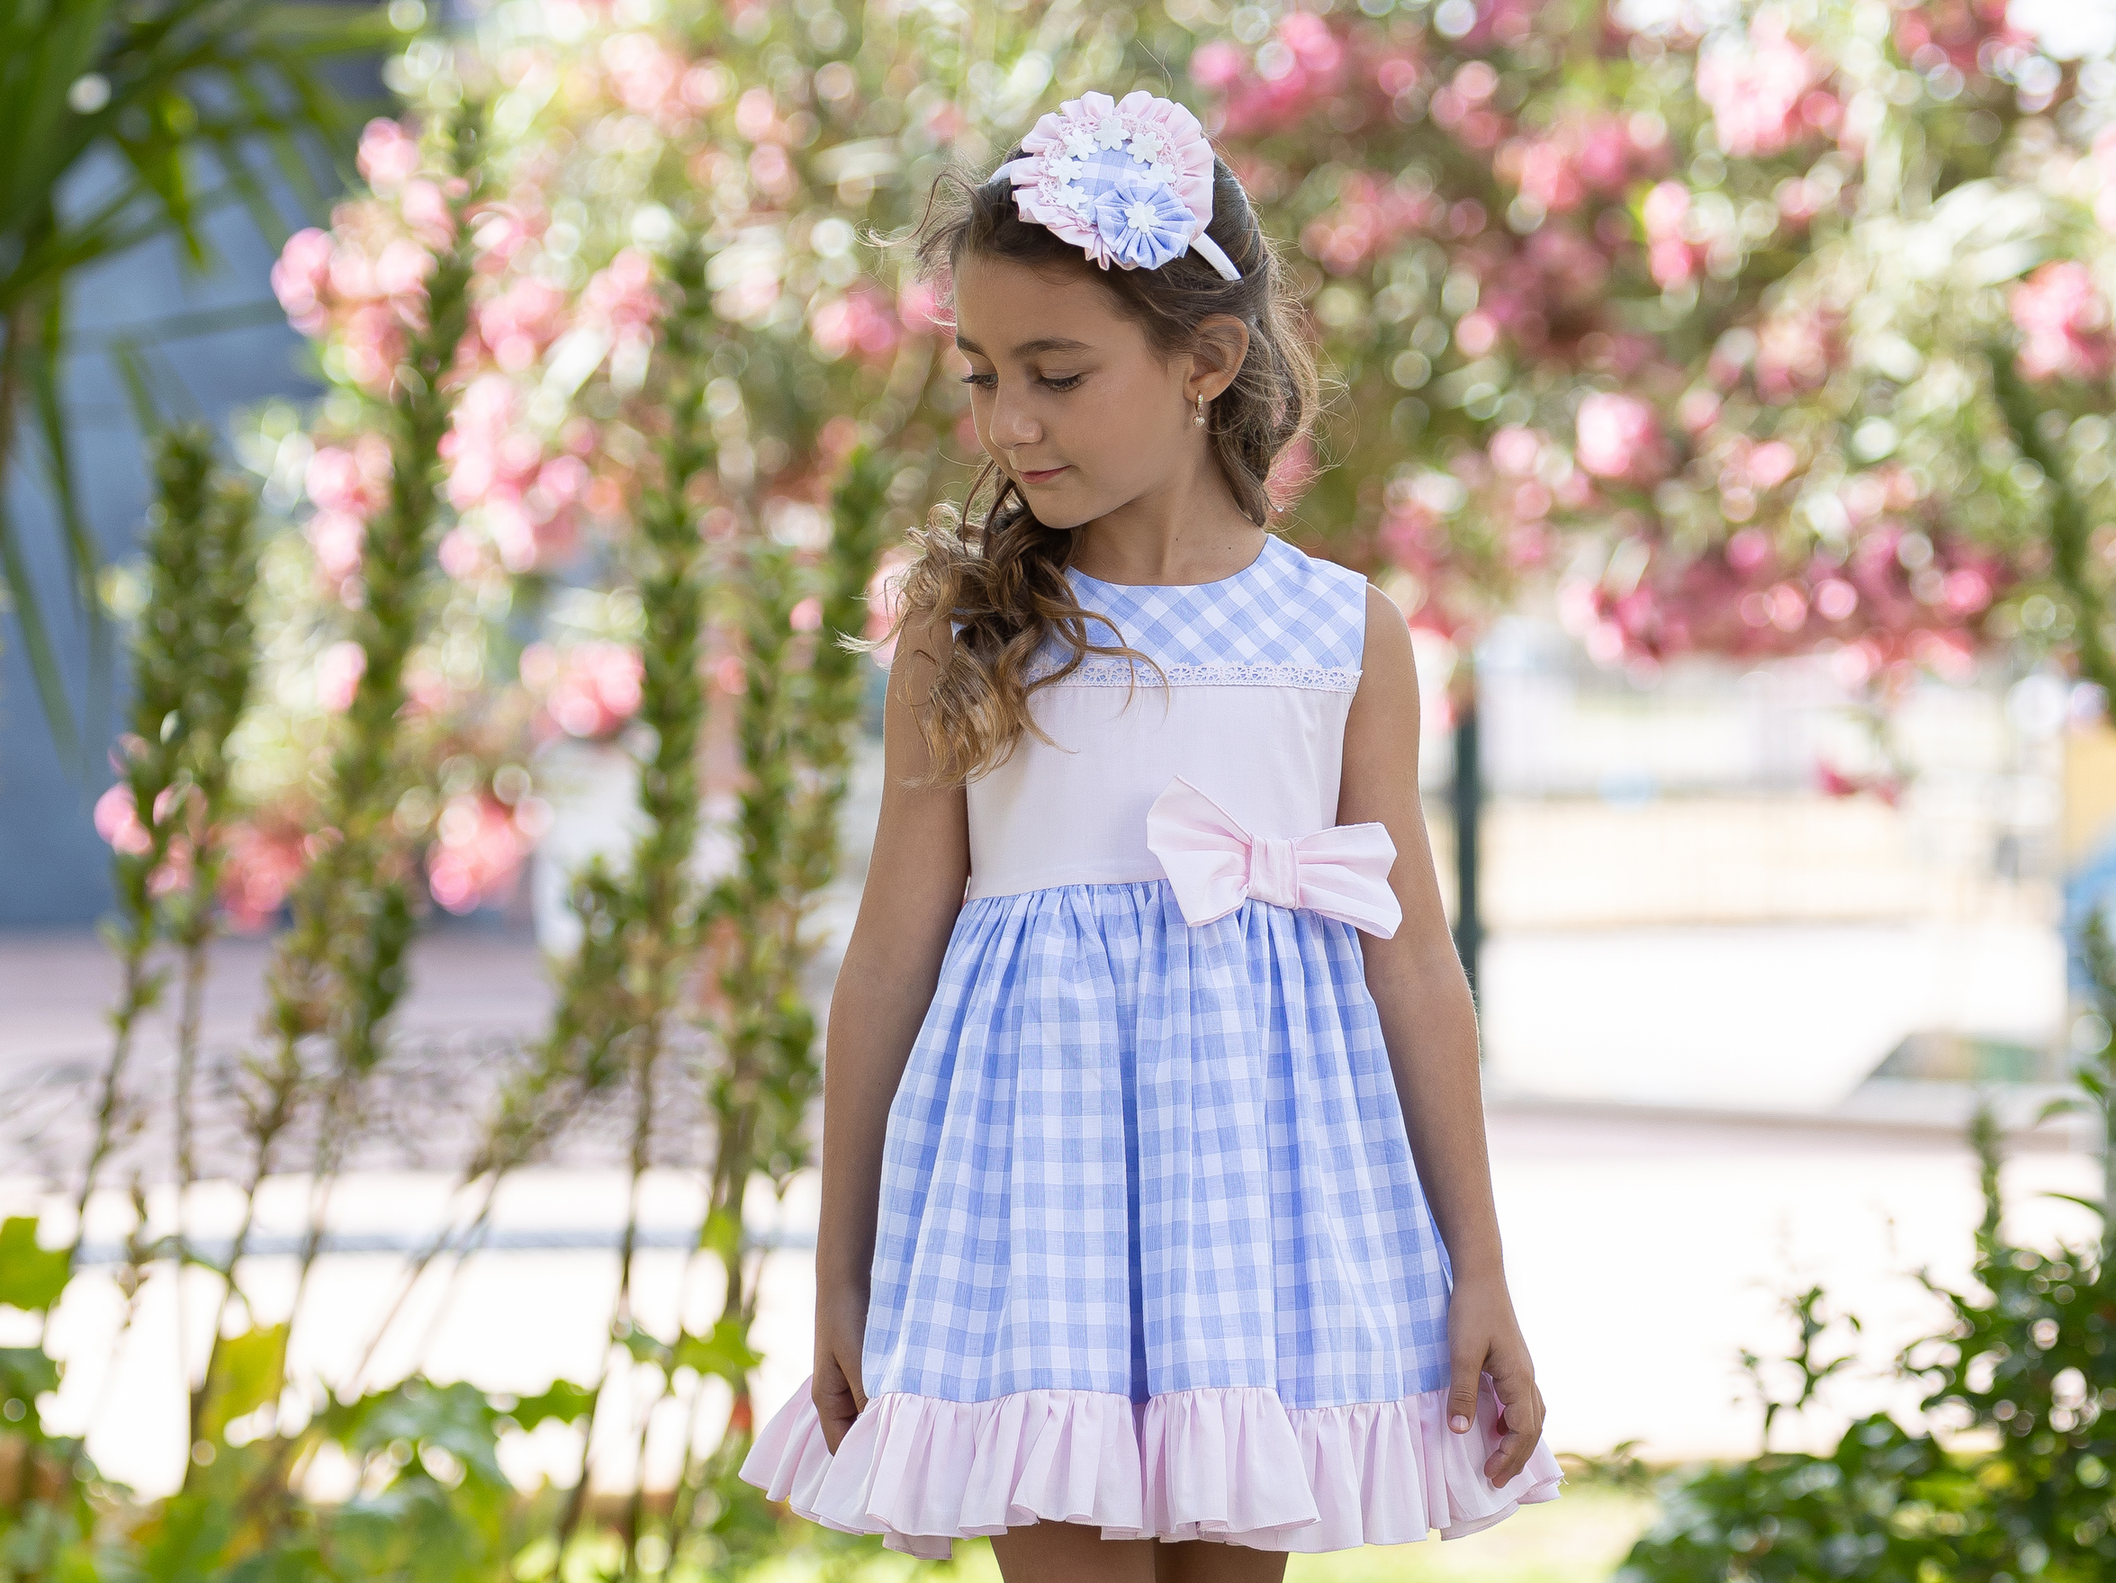 A charming little girl dons a stunning Spanish attire for a special occasion, her dress a harmonious blend of light blue and pink hues. The dress, showcasing traditional Spanish design elements, is beautifully complemented by intricate lace detailing. The light blue body of the dress contrasts with a voluminous pink tulle skirt, adding a vibrant pop of color. She stands poised, her attire exuding the elegance and cultural richness of Spain, making her the center of attention in this festive gathering.